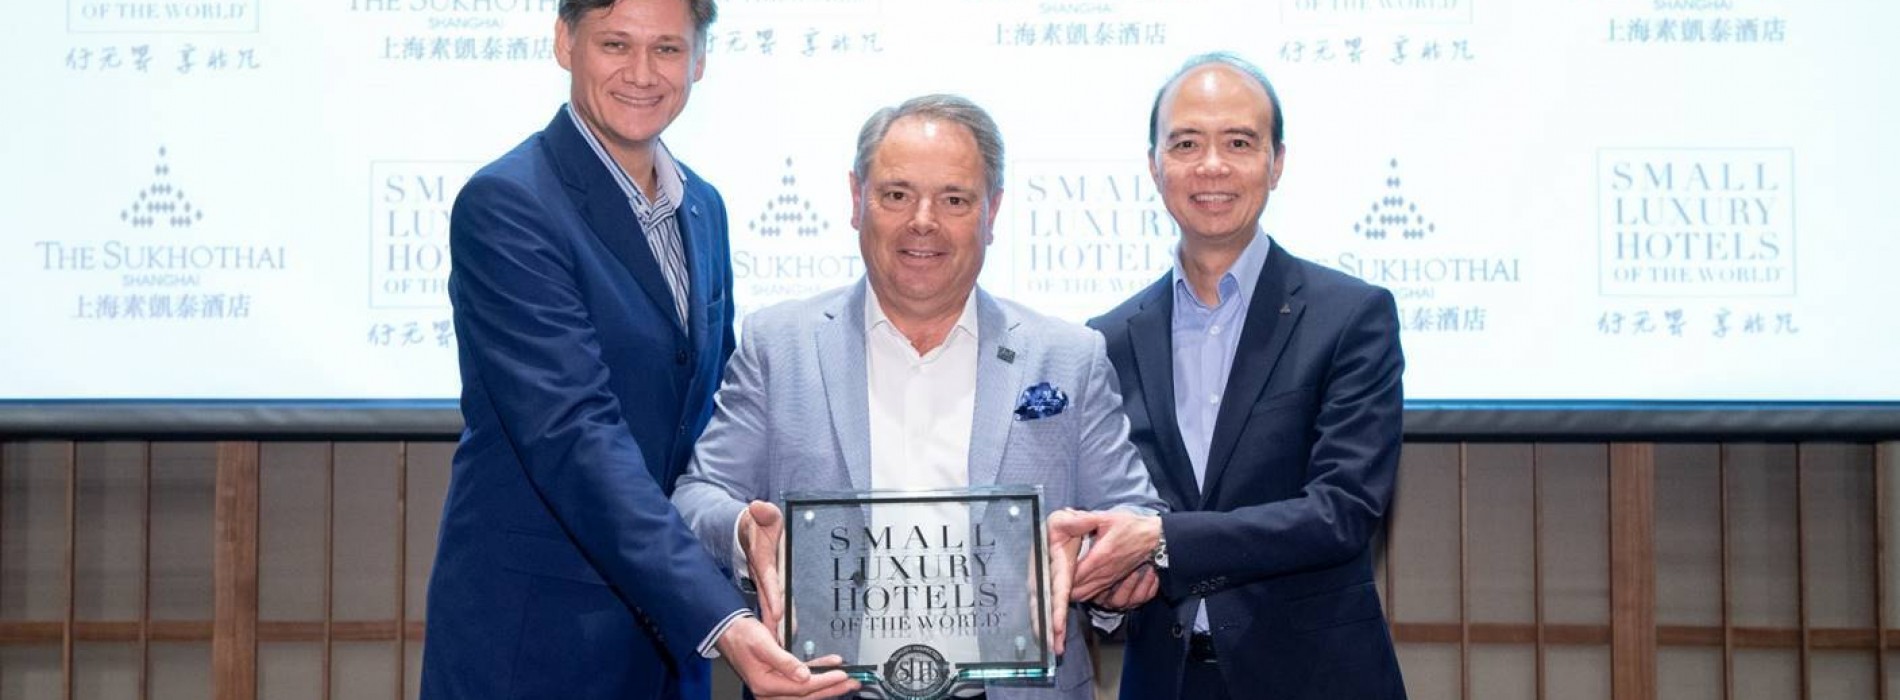 The Sukhothai Shanghai officially joins Small Luxury Hotels of the World